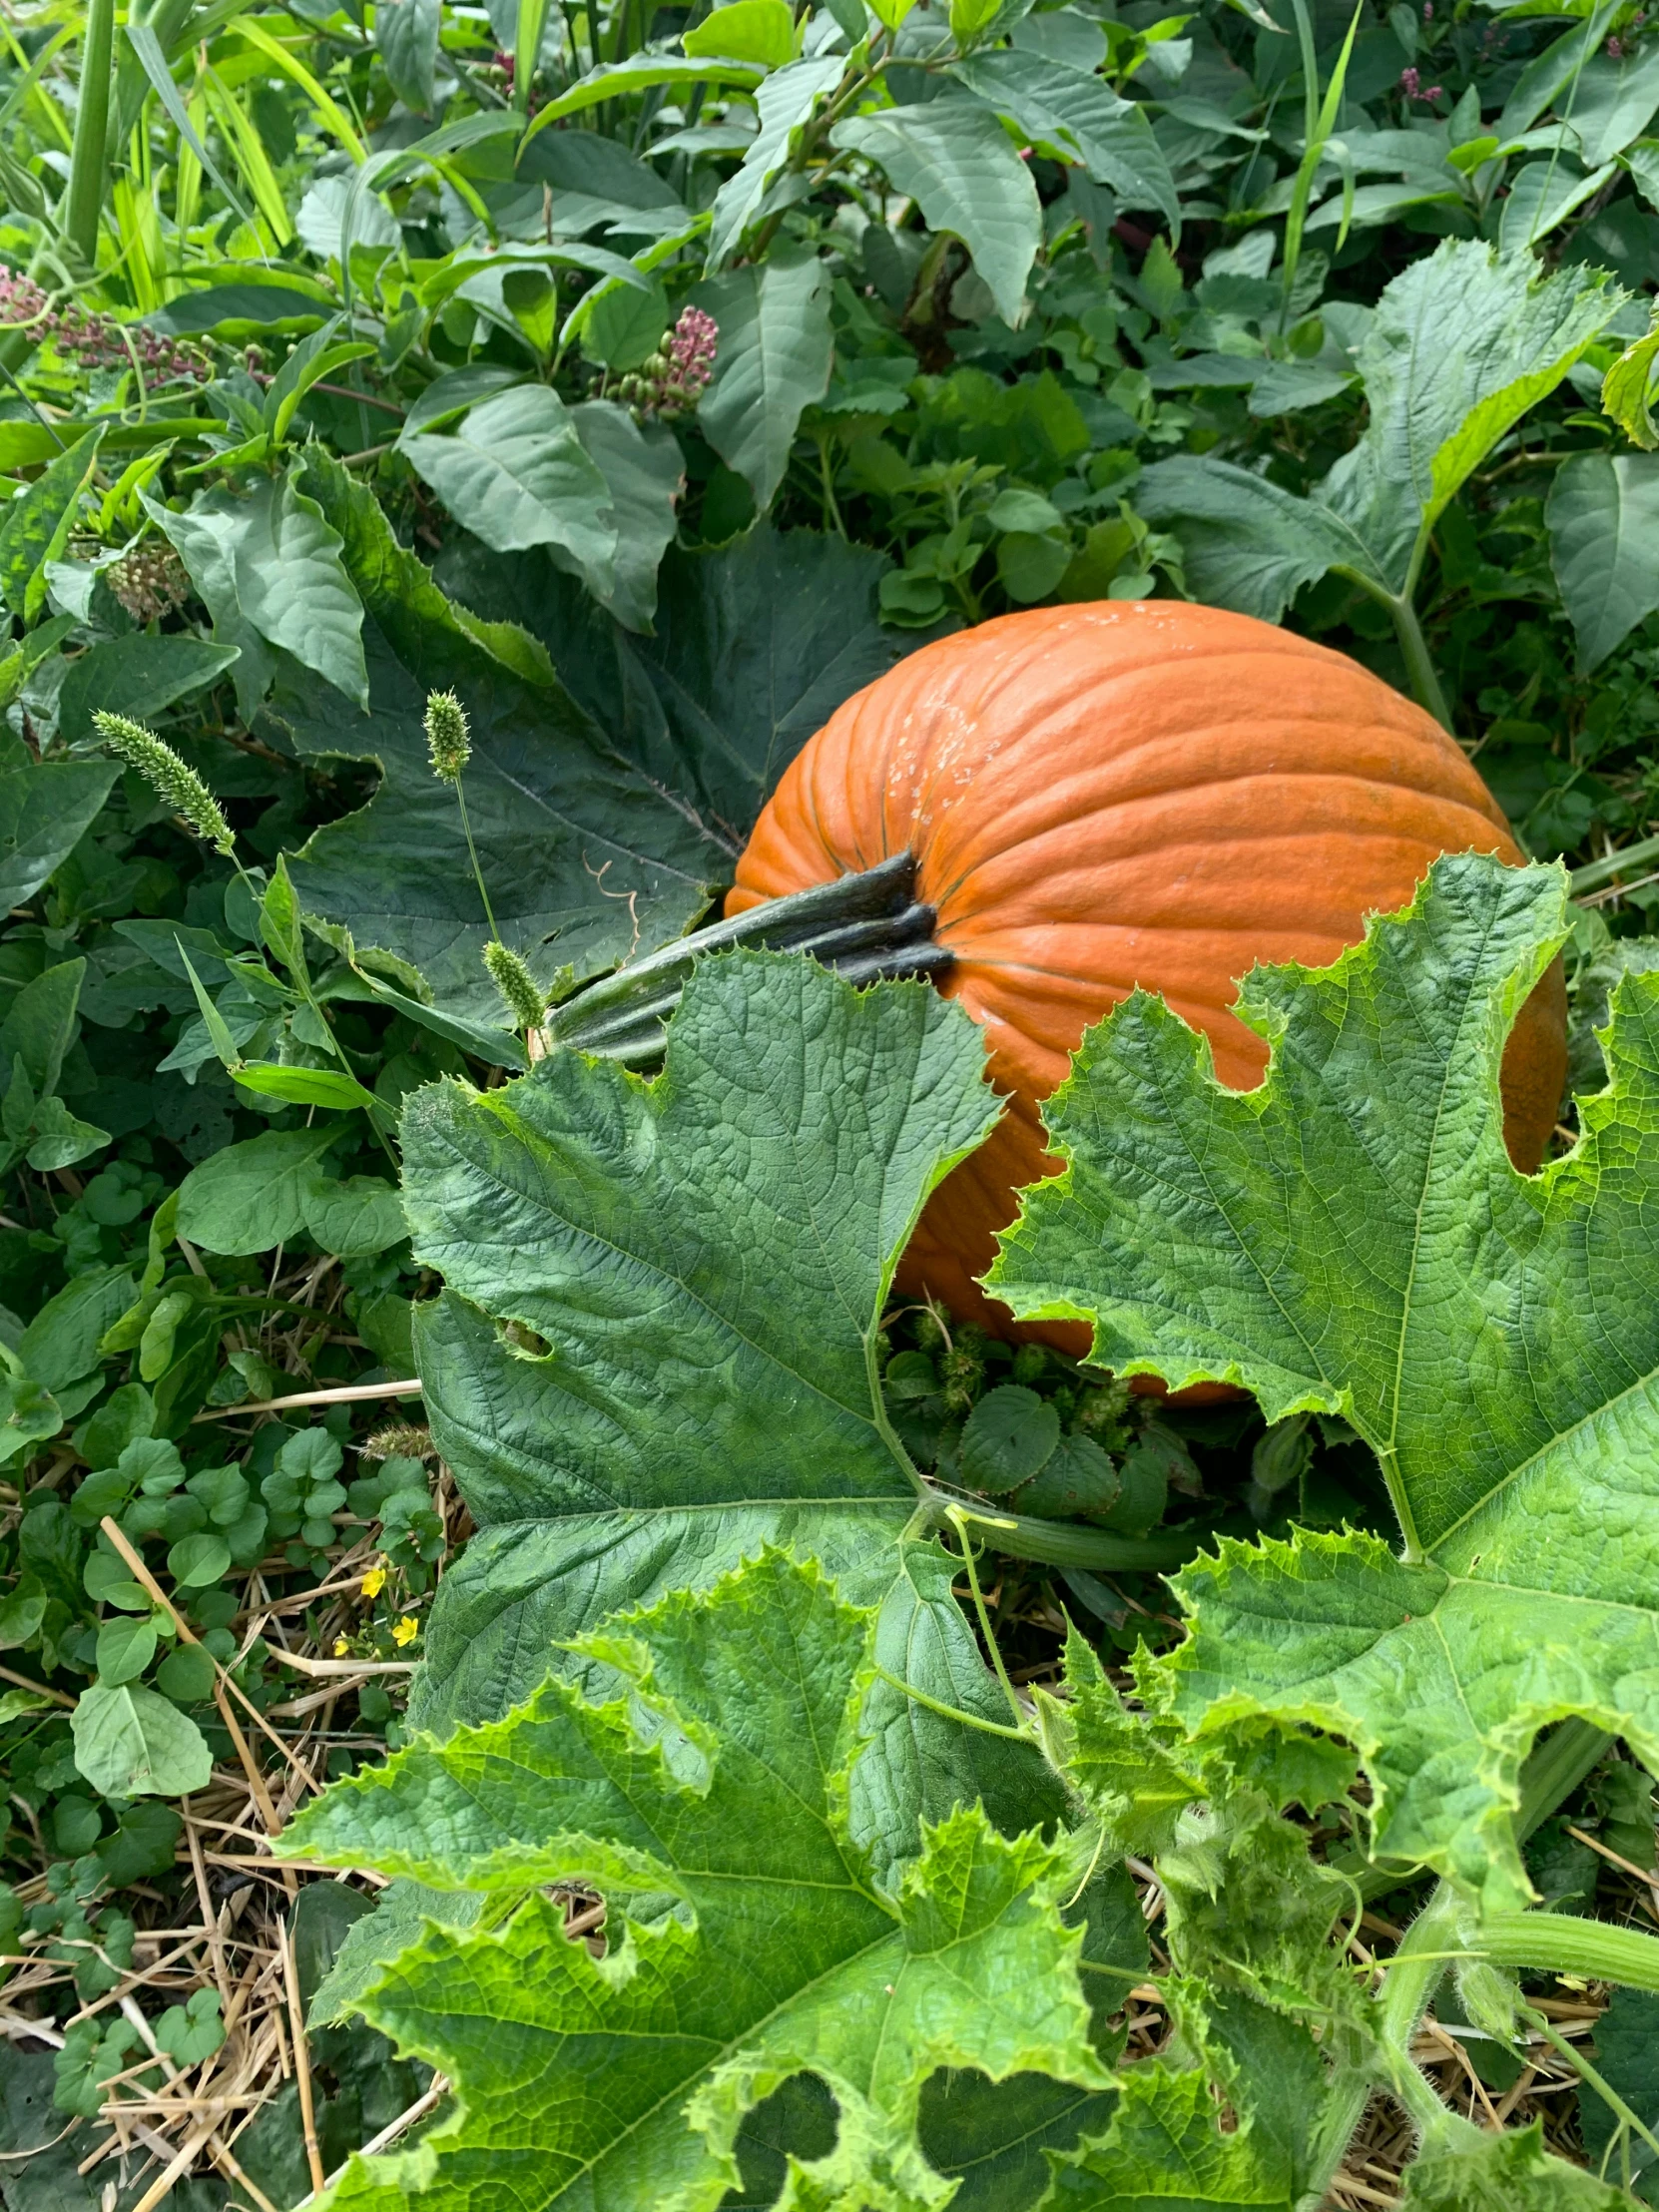 a pumpkin in the middle of a green field